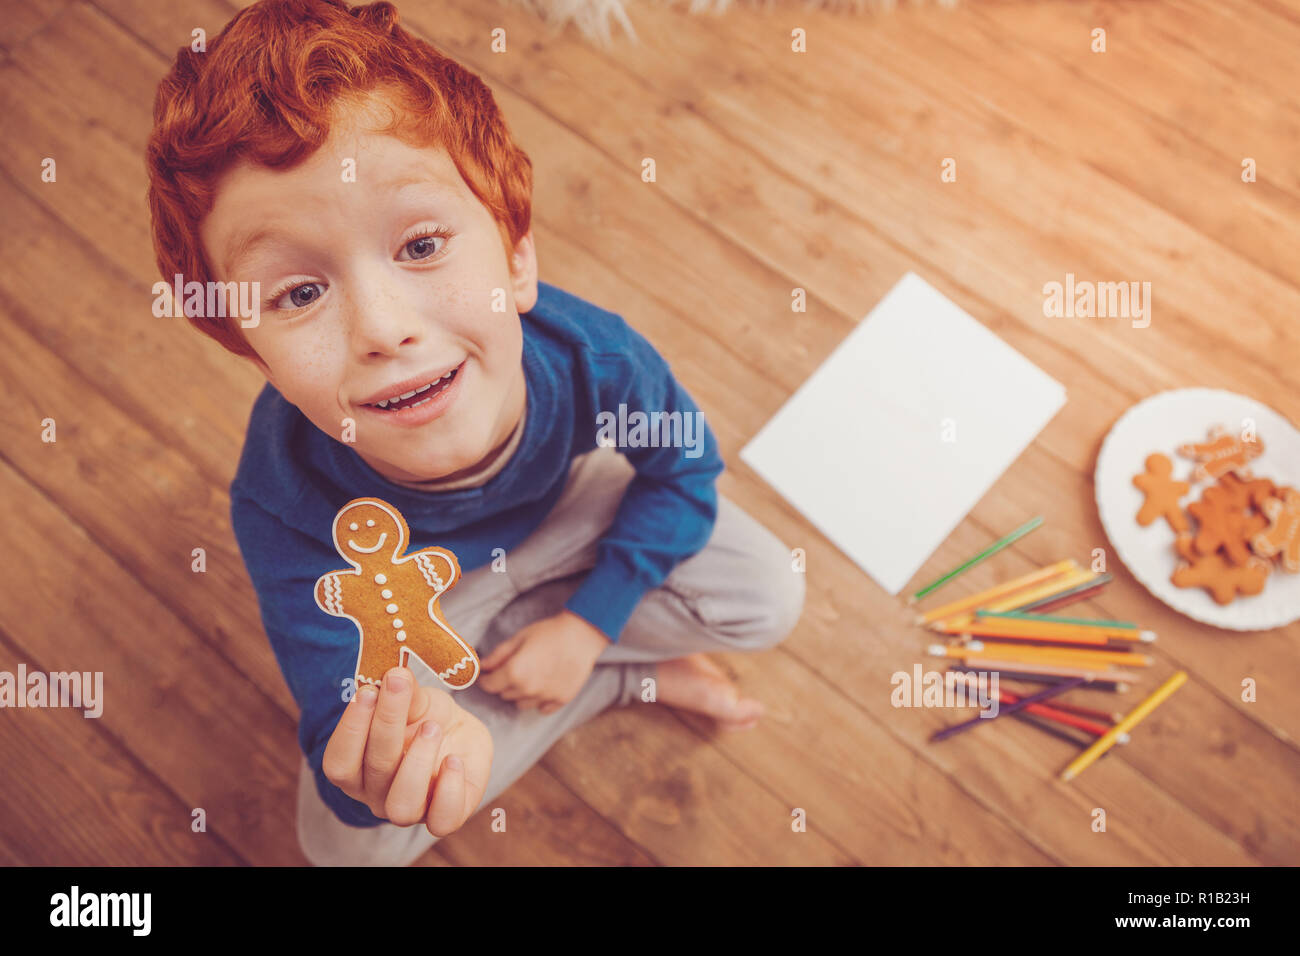 Top view of red-haired boy posing with gingerbread man Stock Photo